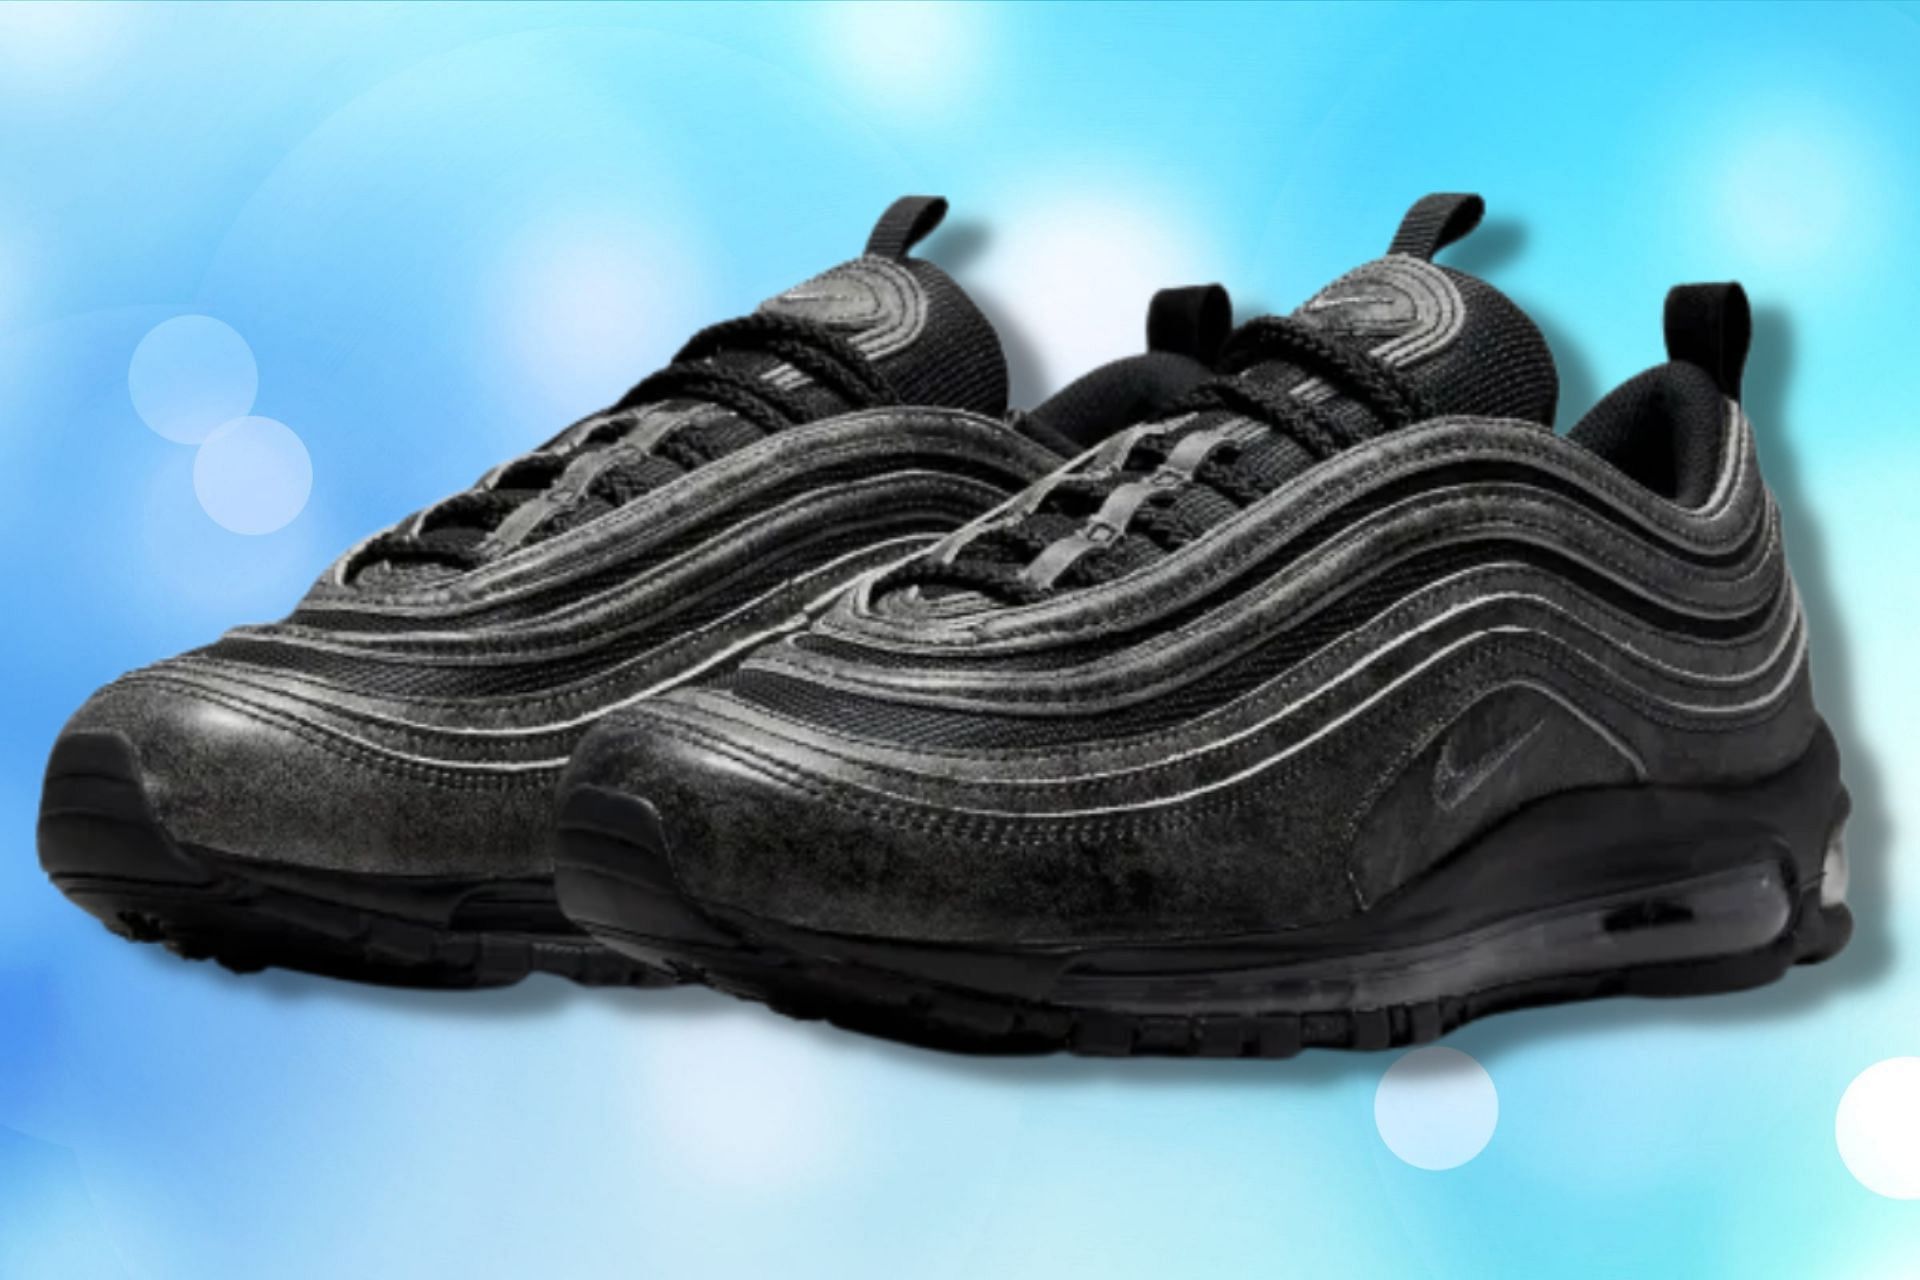 why are air max 97 so popular